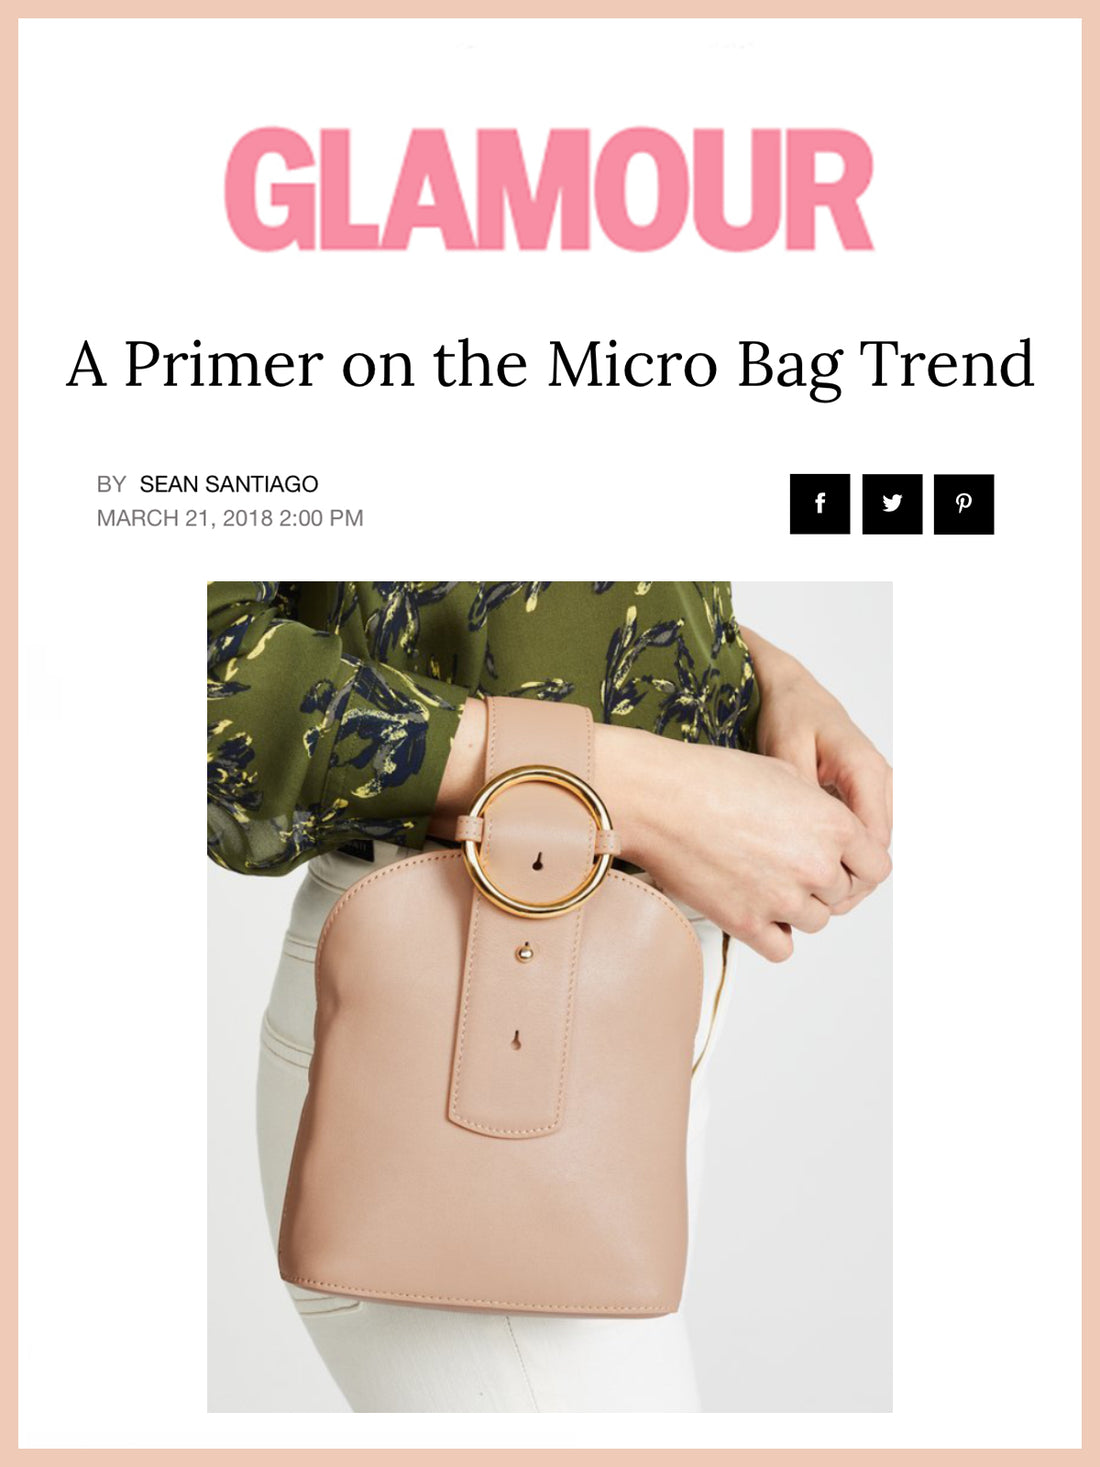 GLAMOUR, A Primer on the Micro Bag Trend